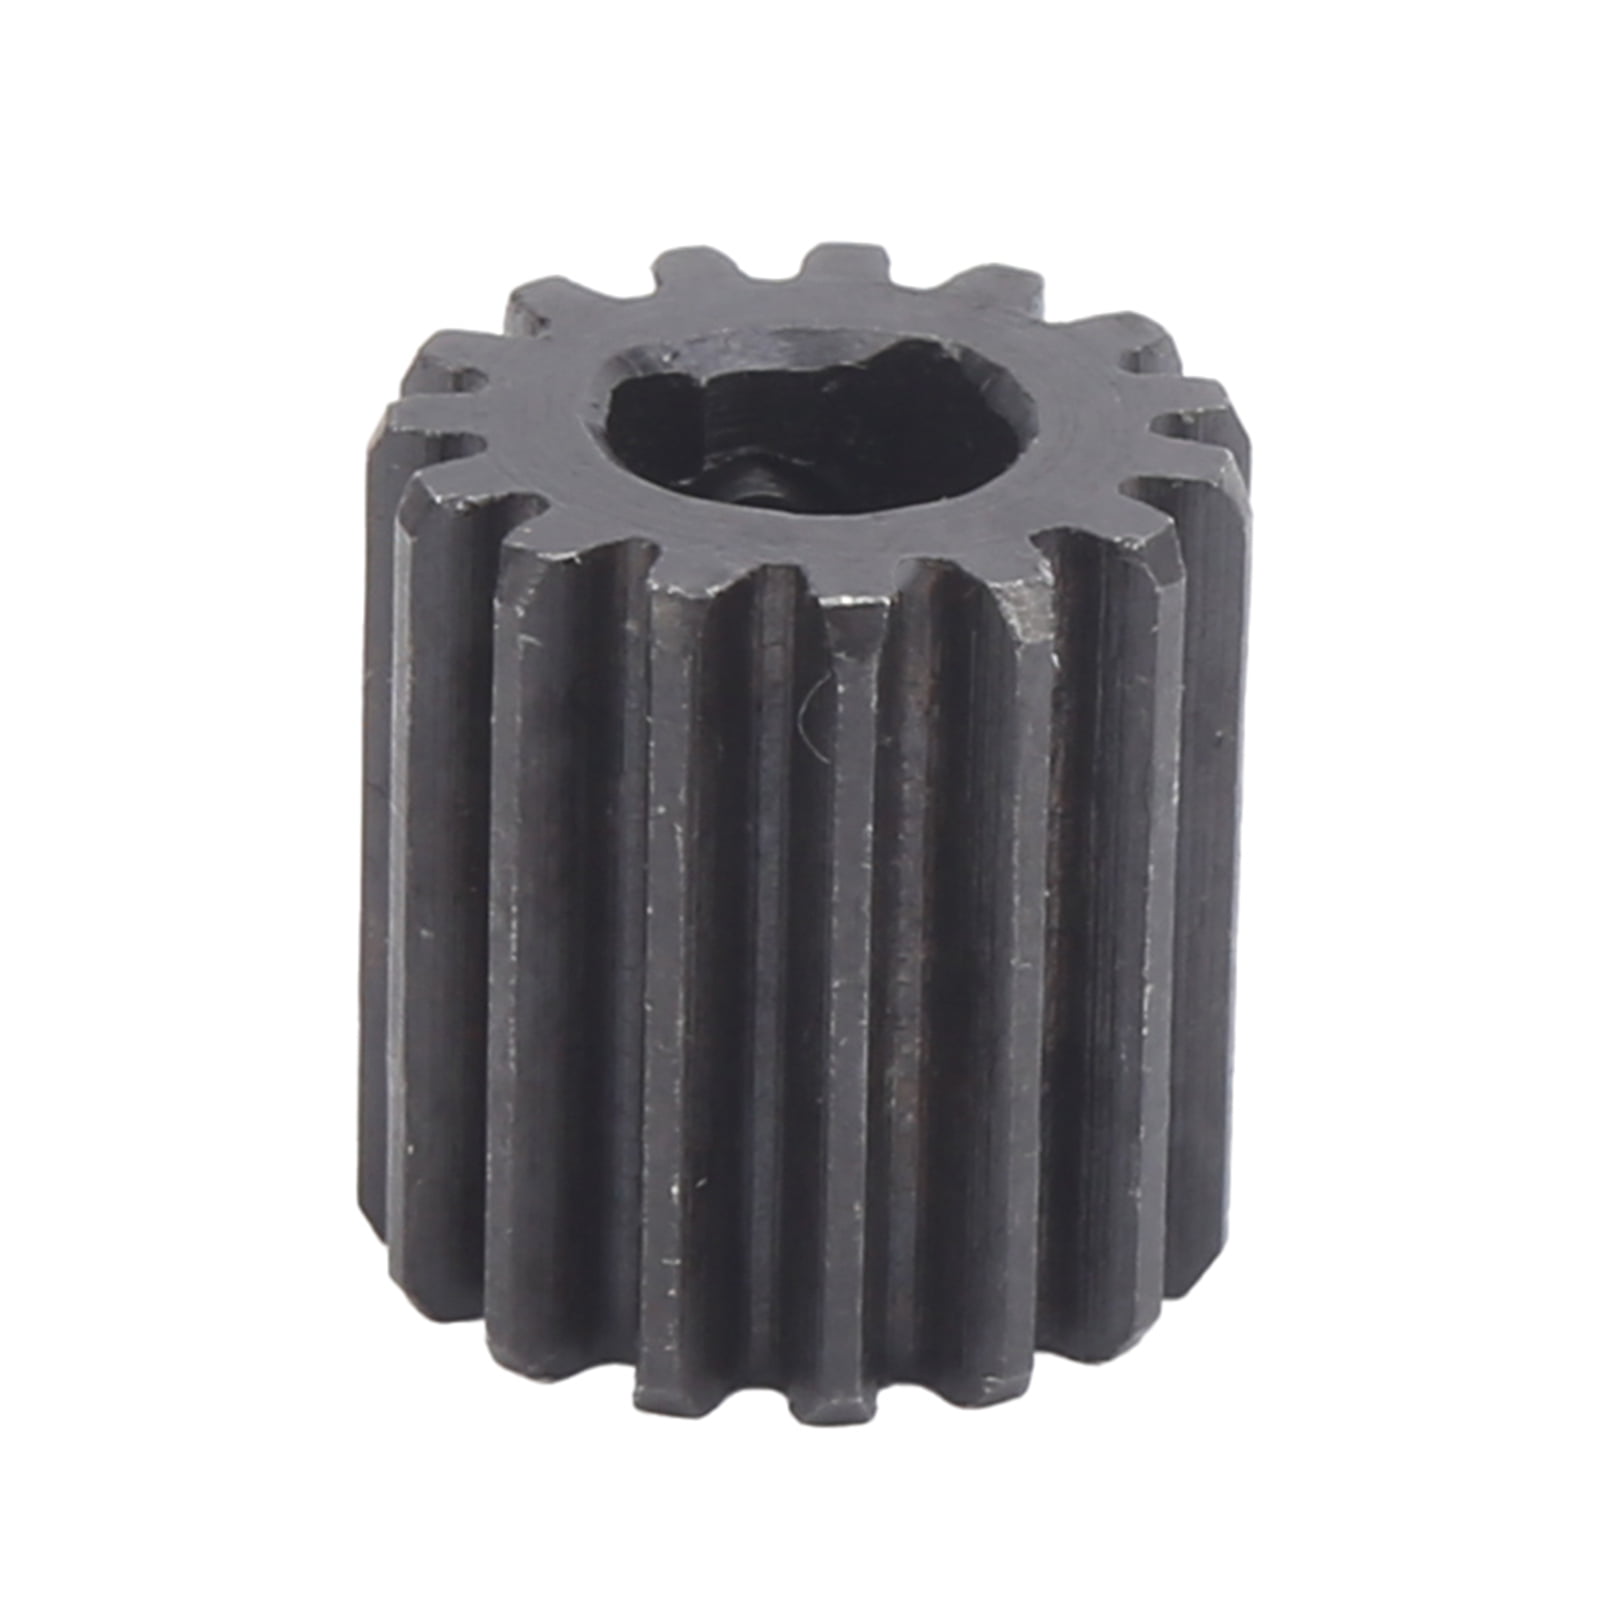 15 Tooth Cast Steel Roller Chain Plate Small Sprocket 6mm D‑Bore Hole for DIY Project